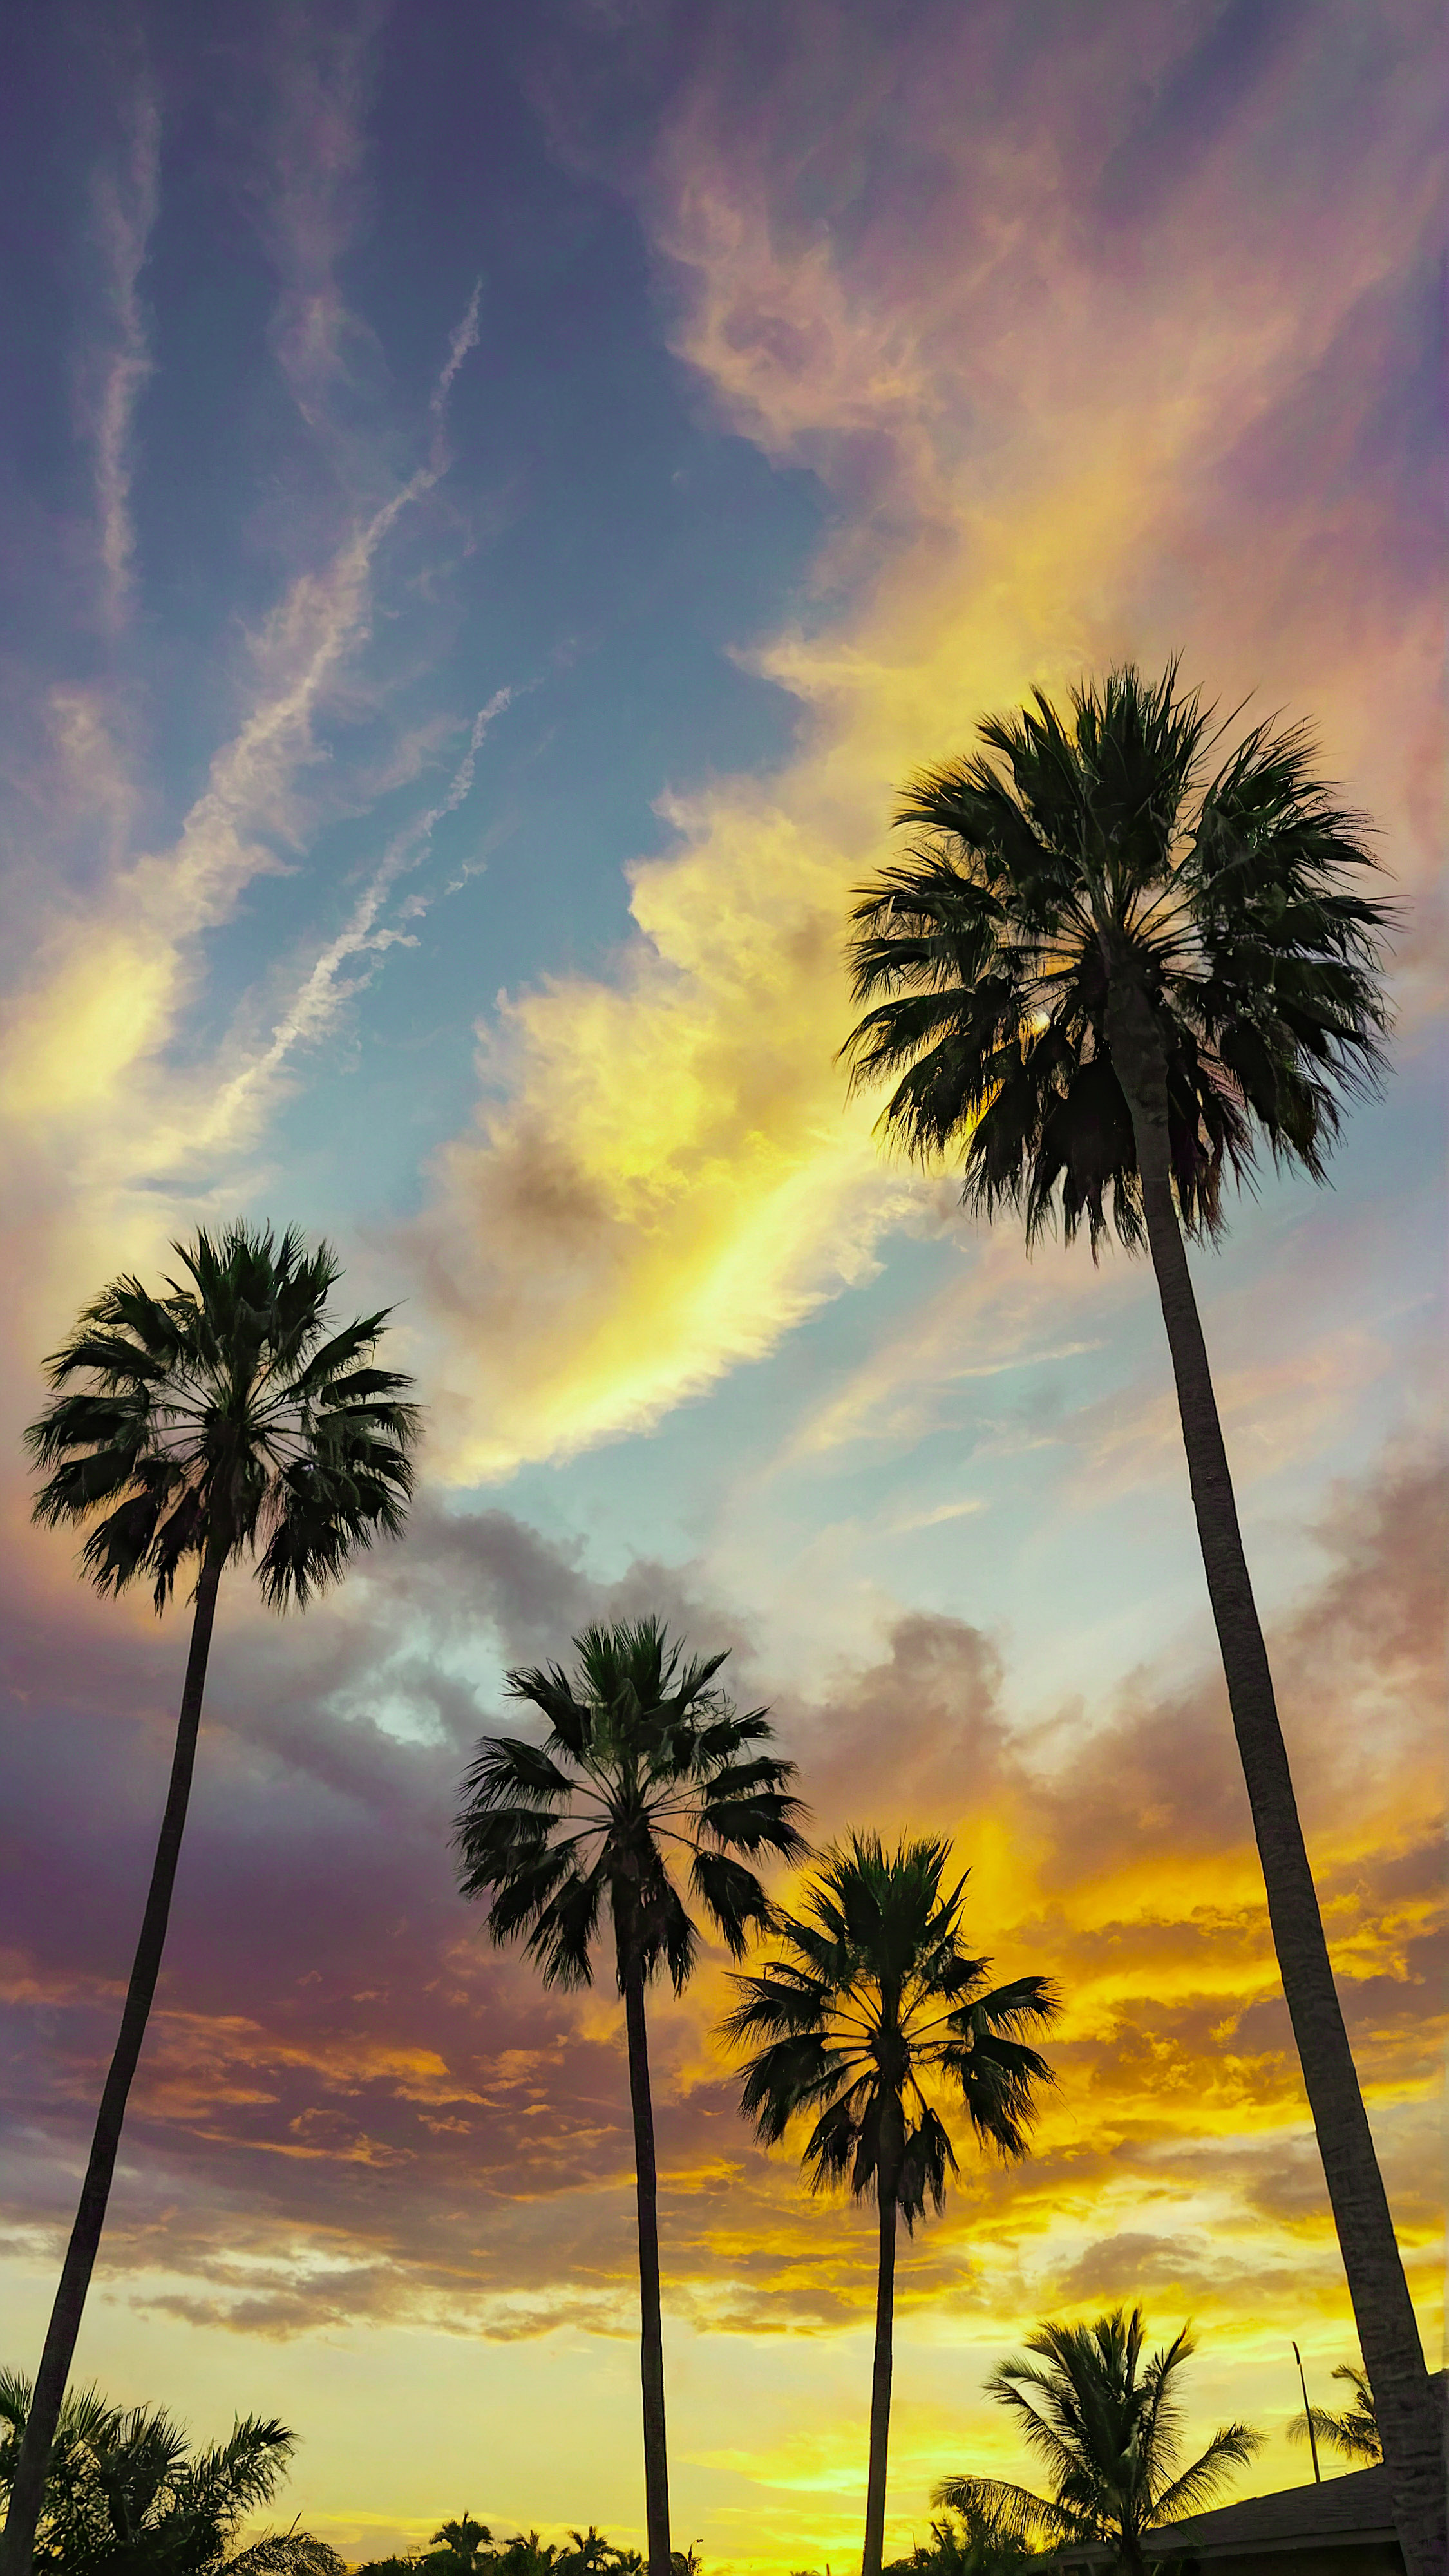 Enjoy the beauty and style of our aesthetic iPhone background, featuring a serene and colorful sky filled with fluffy clouds, palm trees in the foreground, and streaks of light passing through the atmosphere.